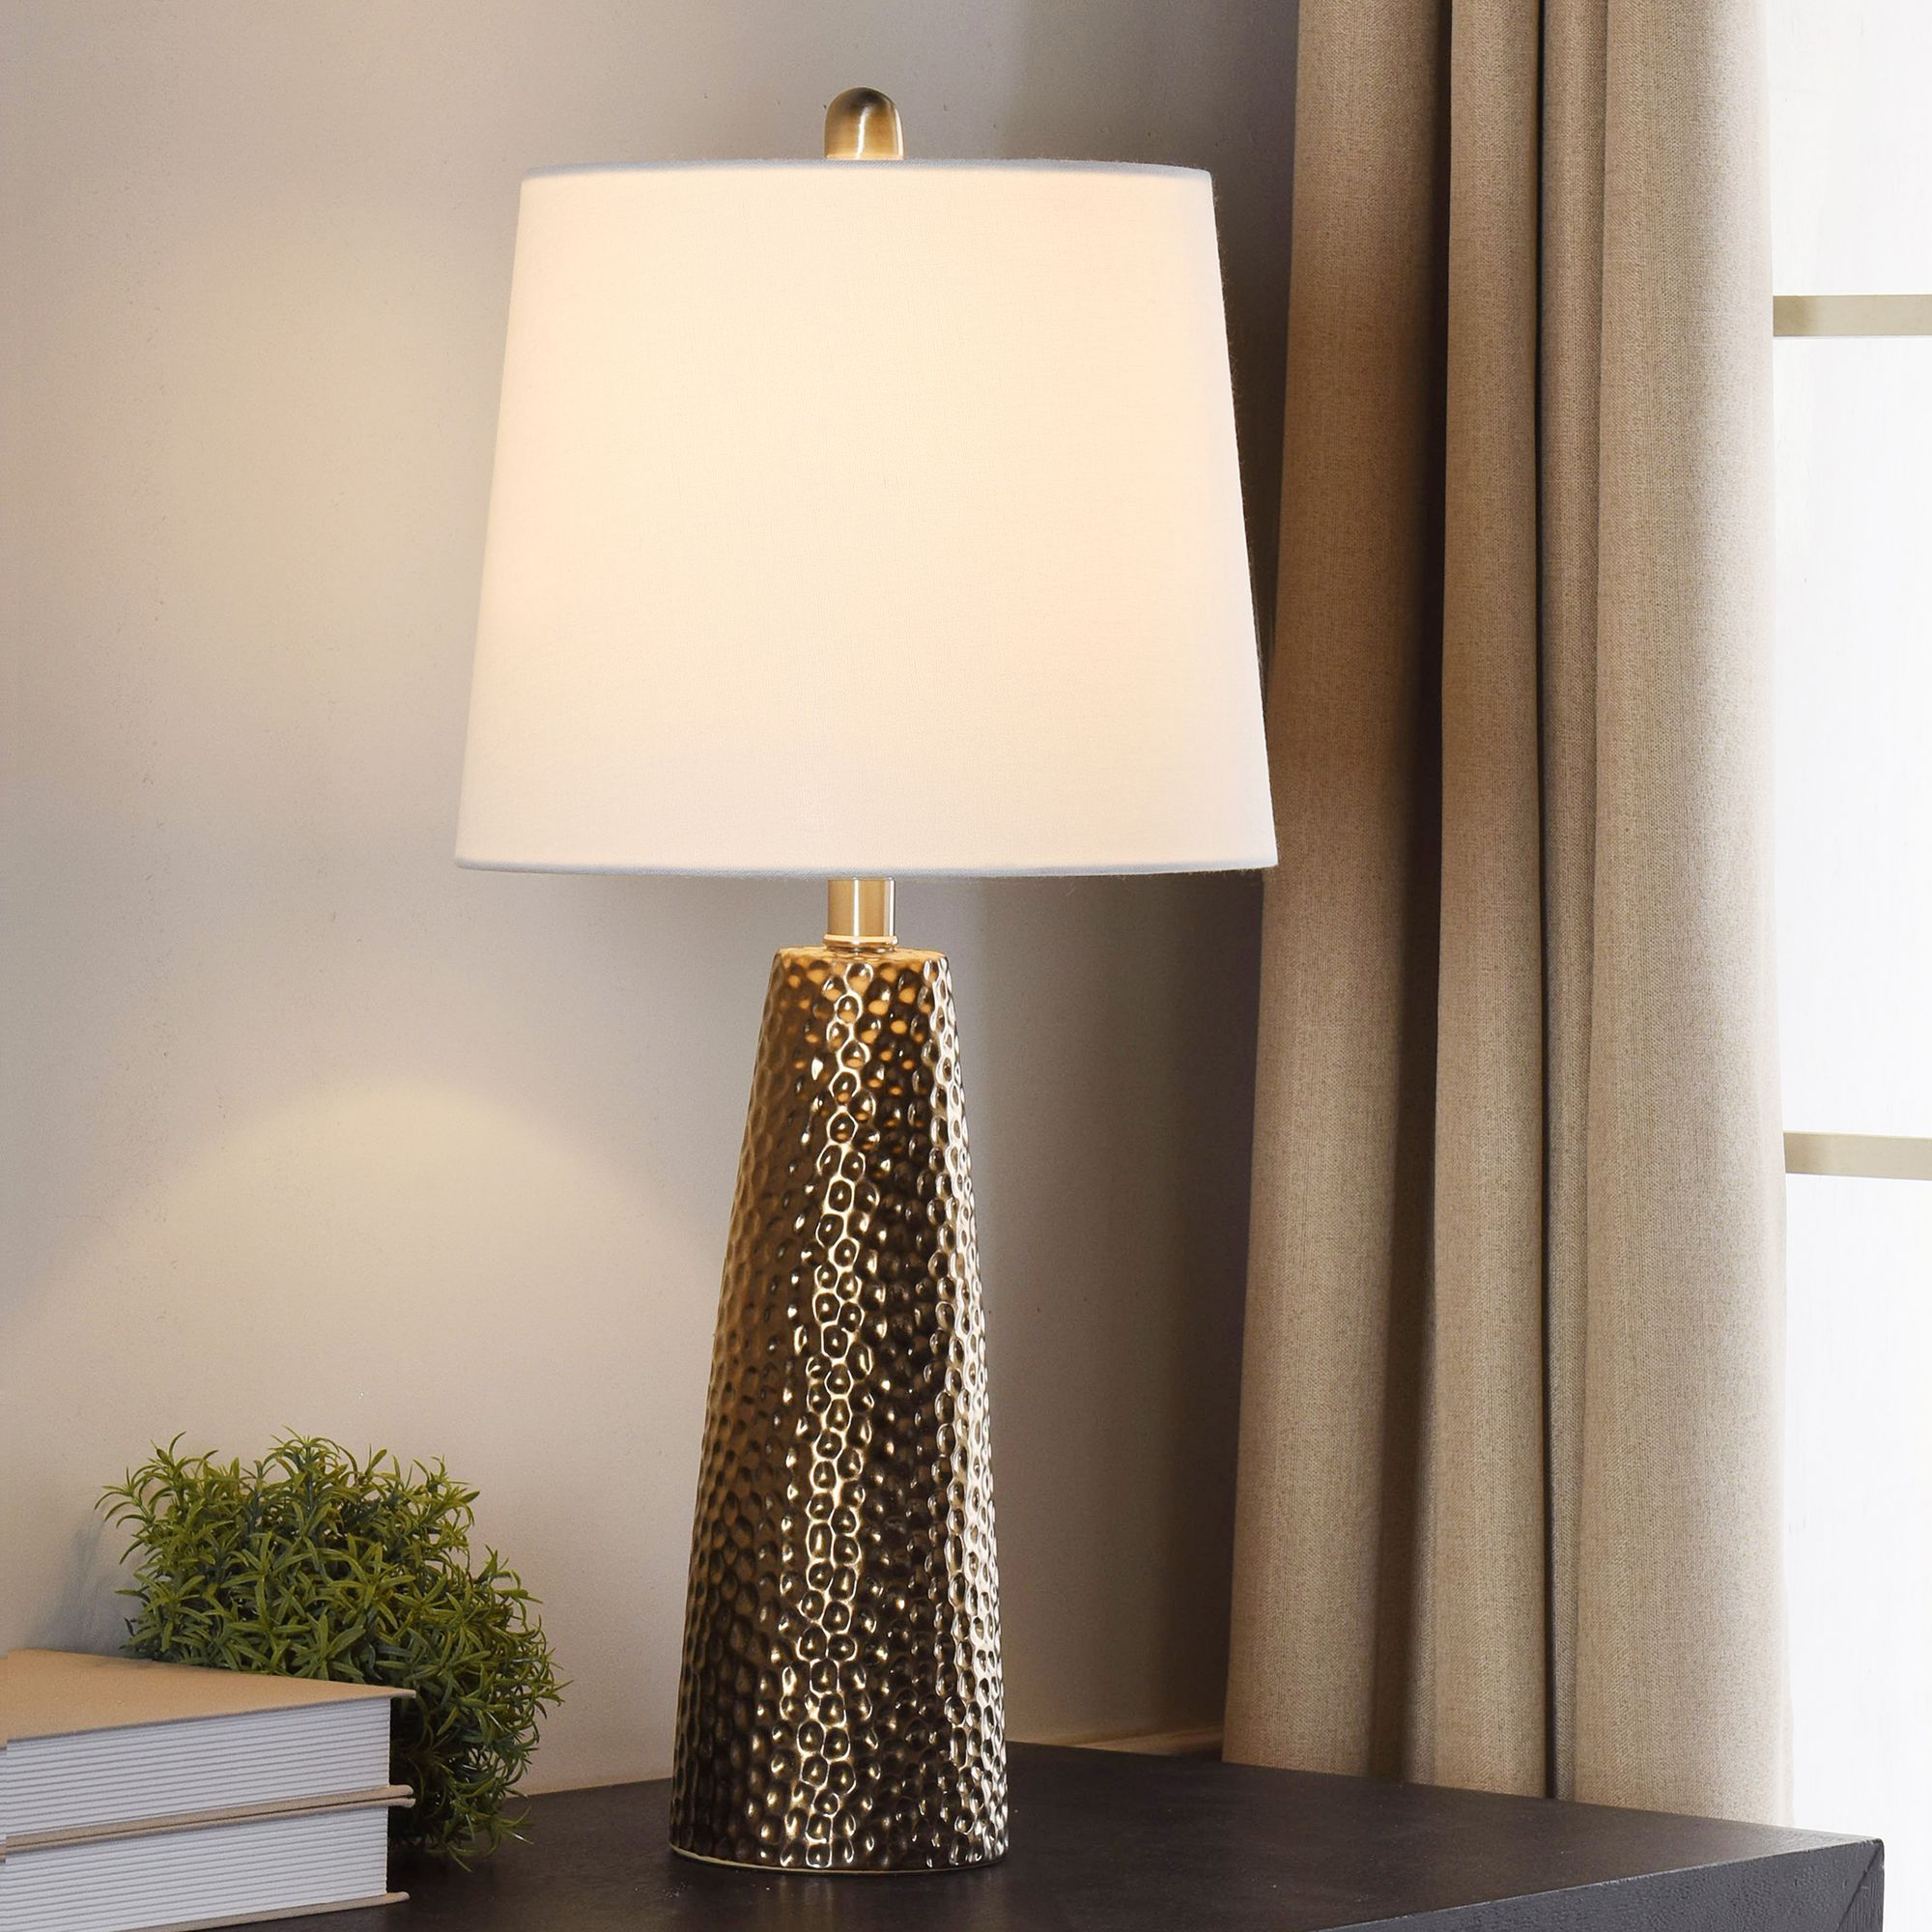 Home With A Bronze Lamp Stylish Decor: Enhance Your Living Space with a Bronze Lamp